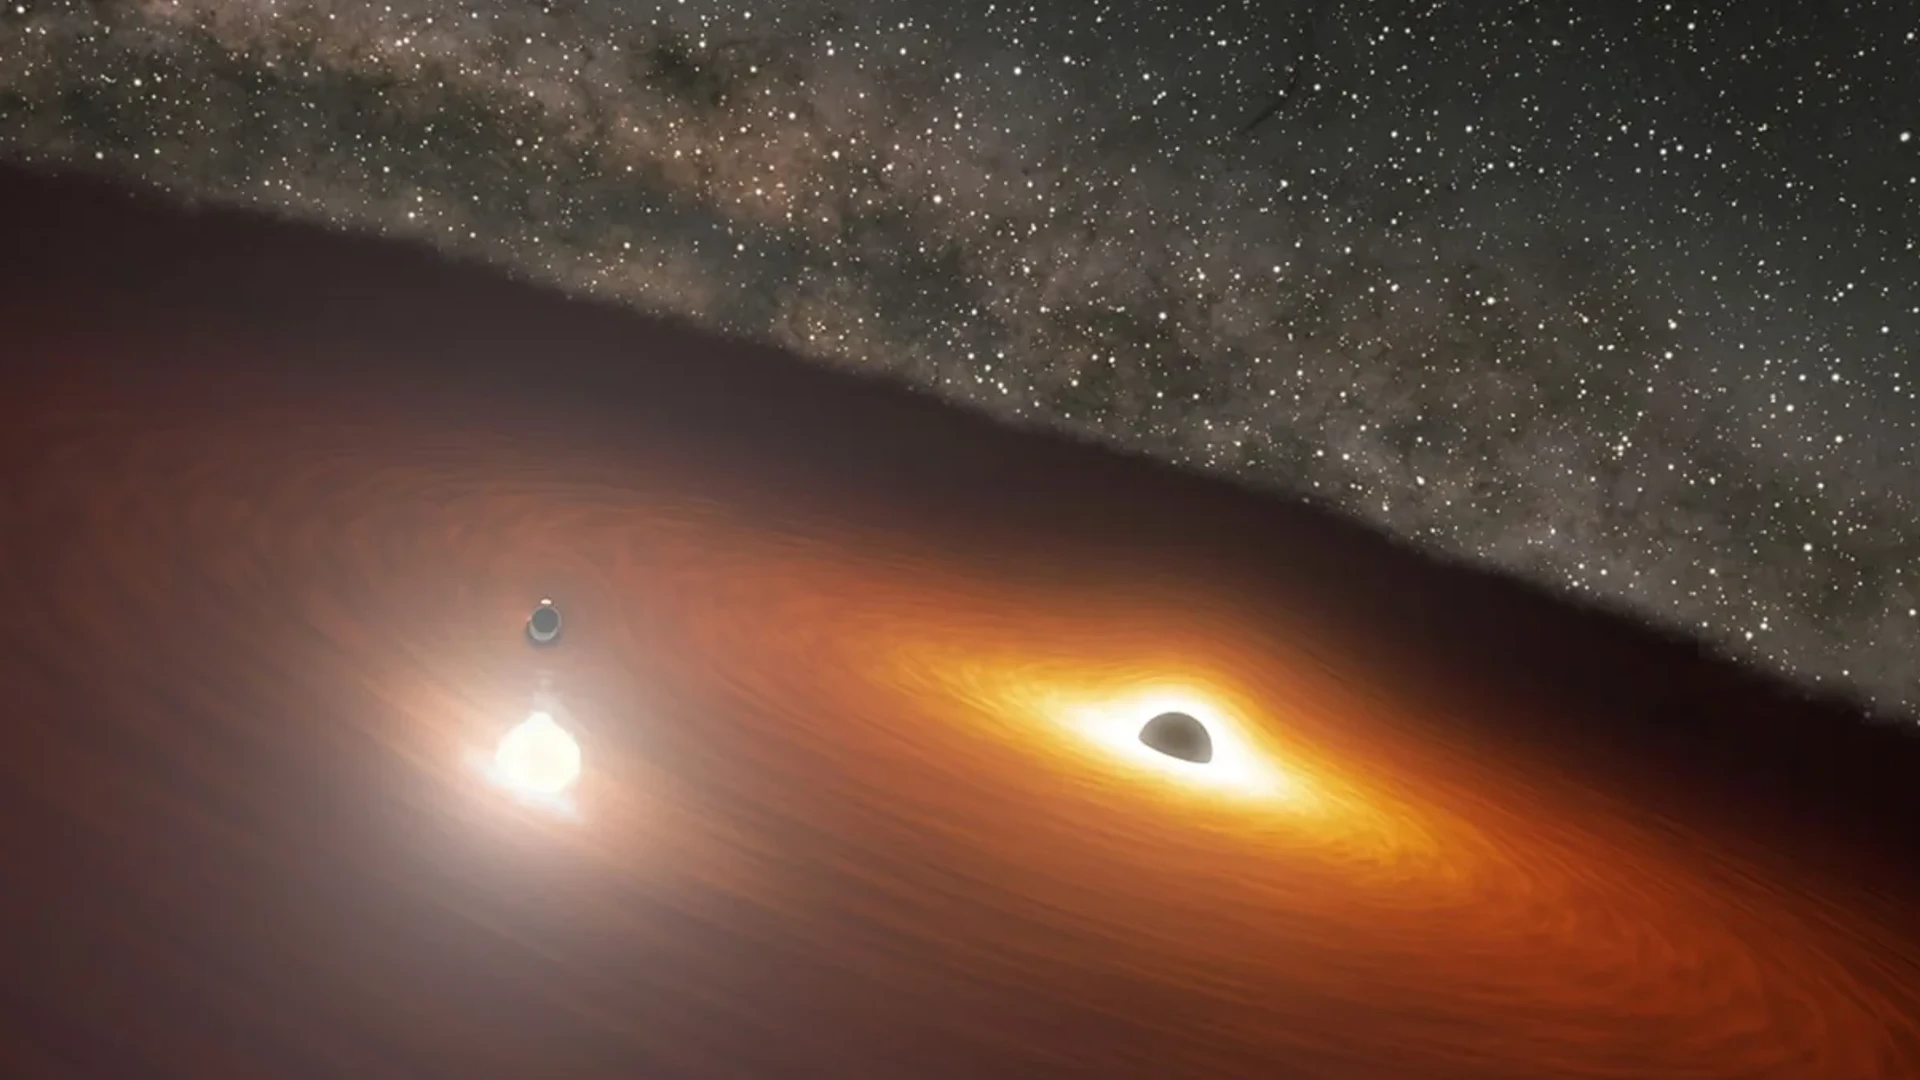 Astronomers Identify A Pair Of Supermassive Black Holes Tucked In Cosmic Walts